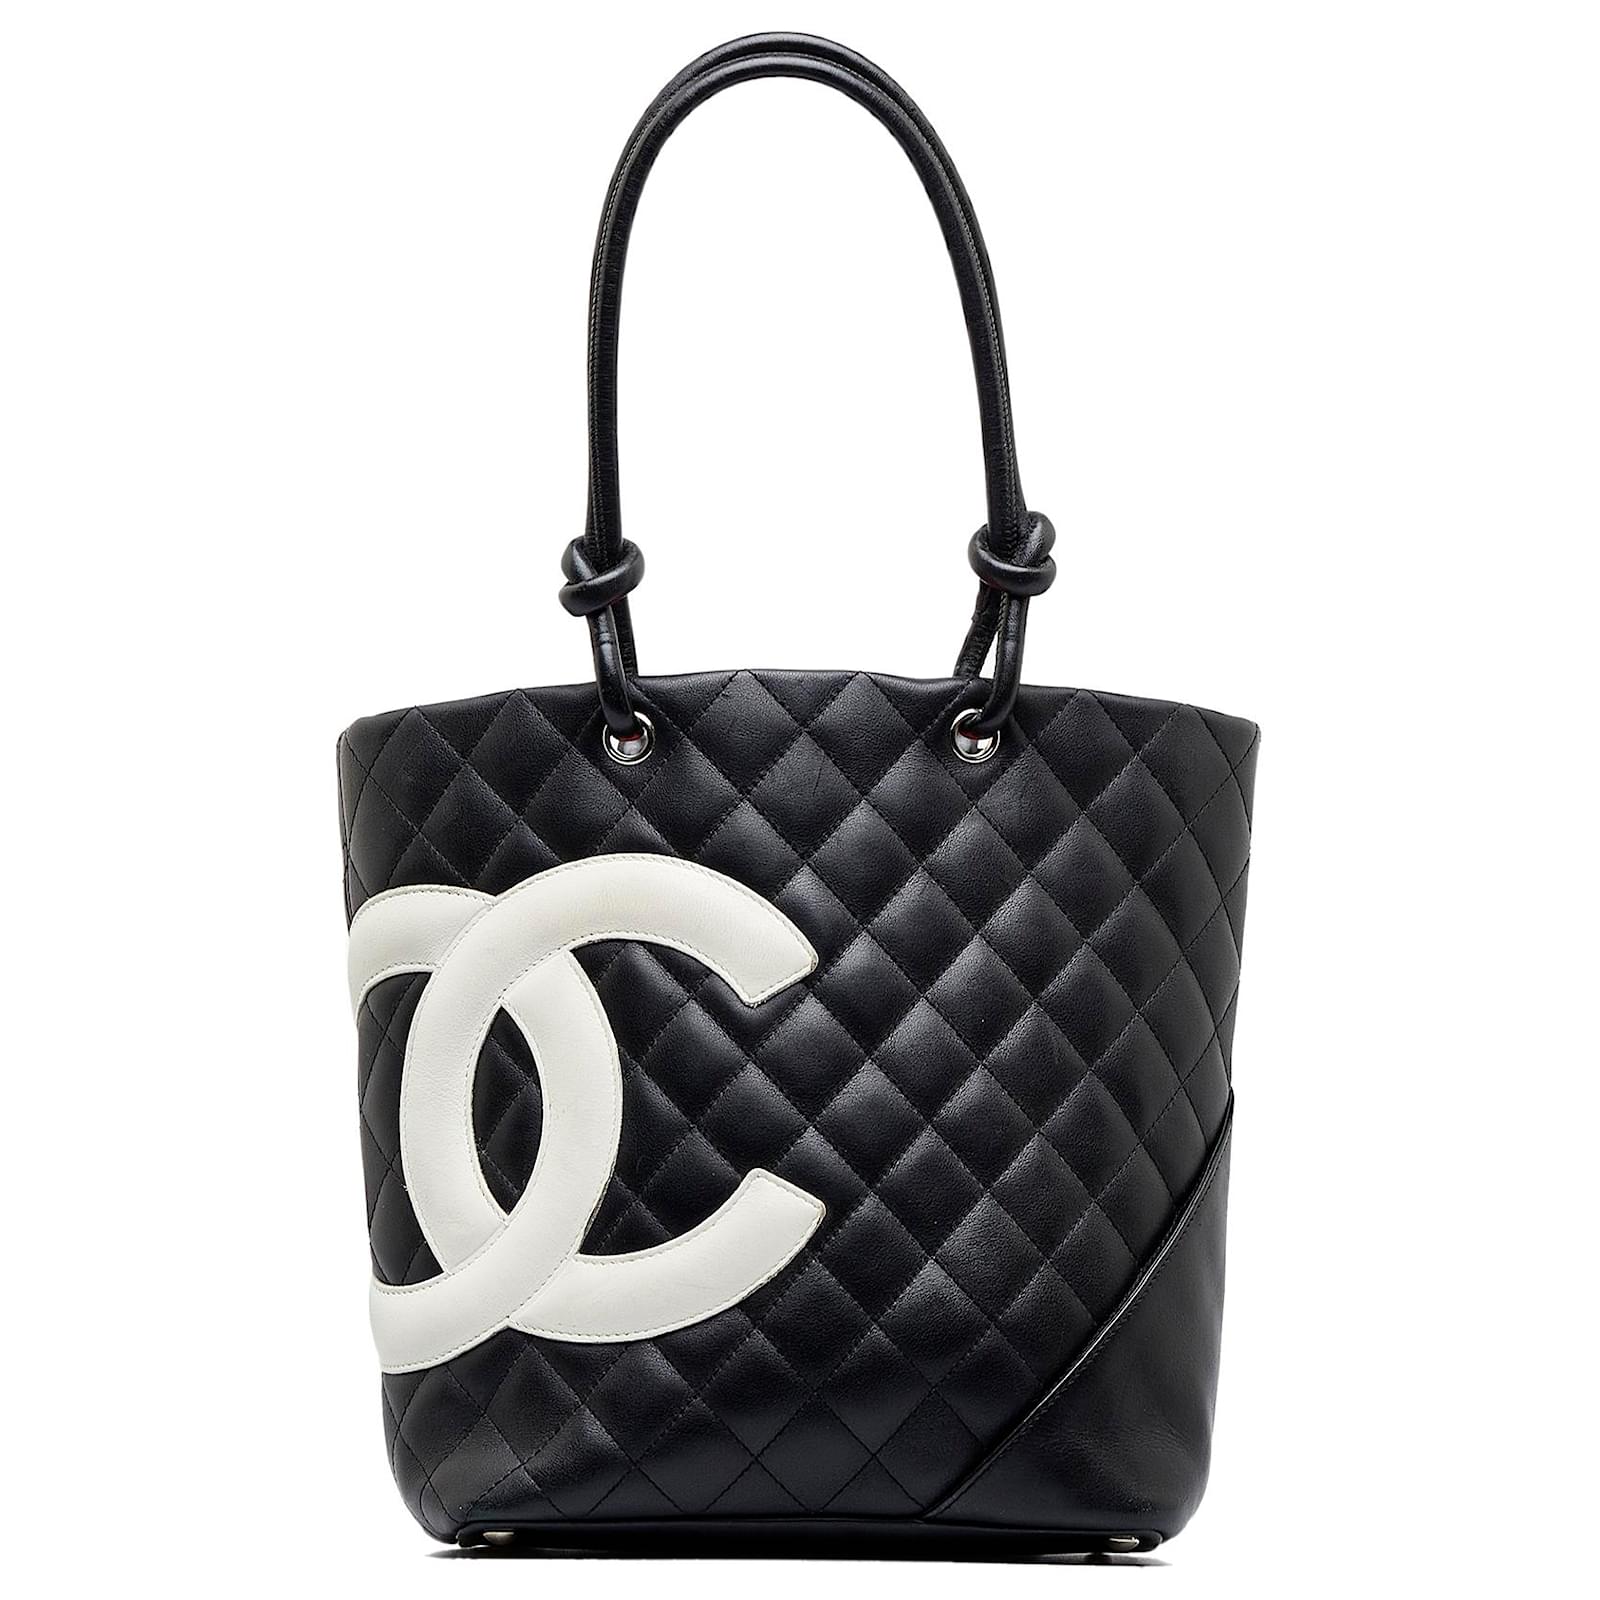 Pre-owned Chanel Beige/black Quilted Leather Large Ligne Cambon Tote